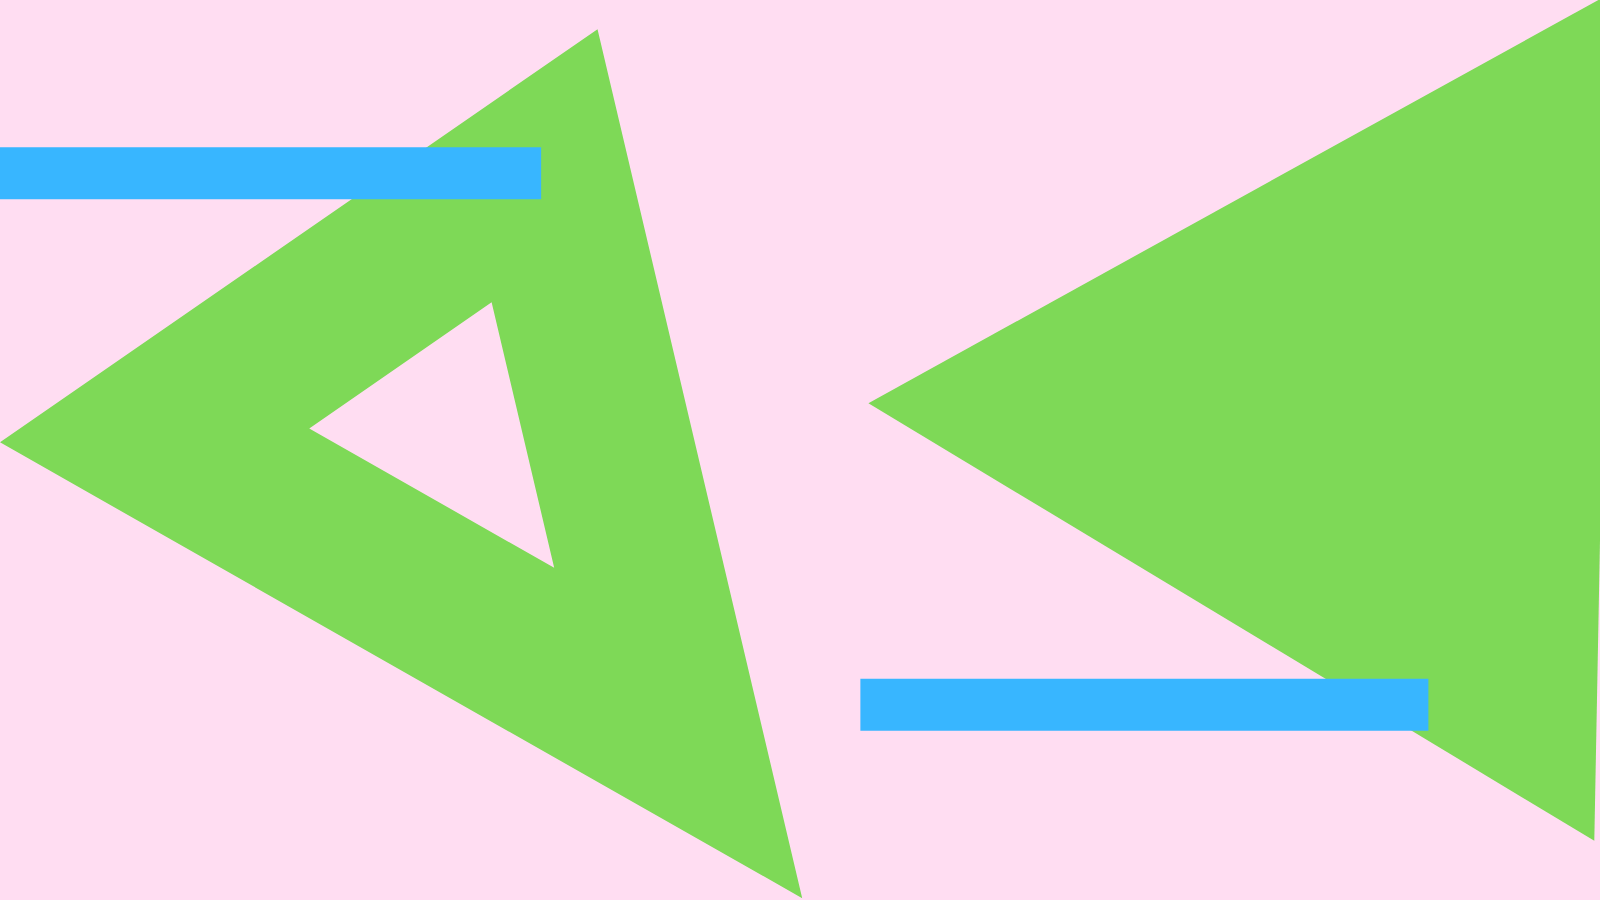 geometric shapes, pink, green and turquoise